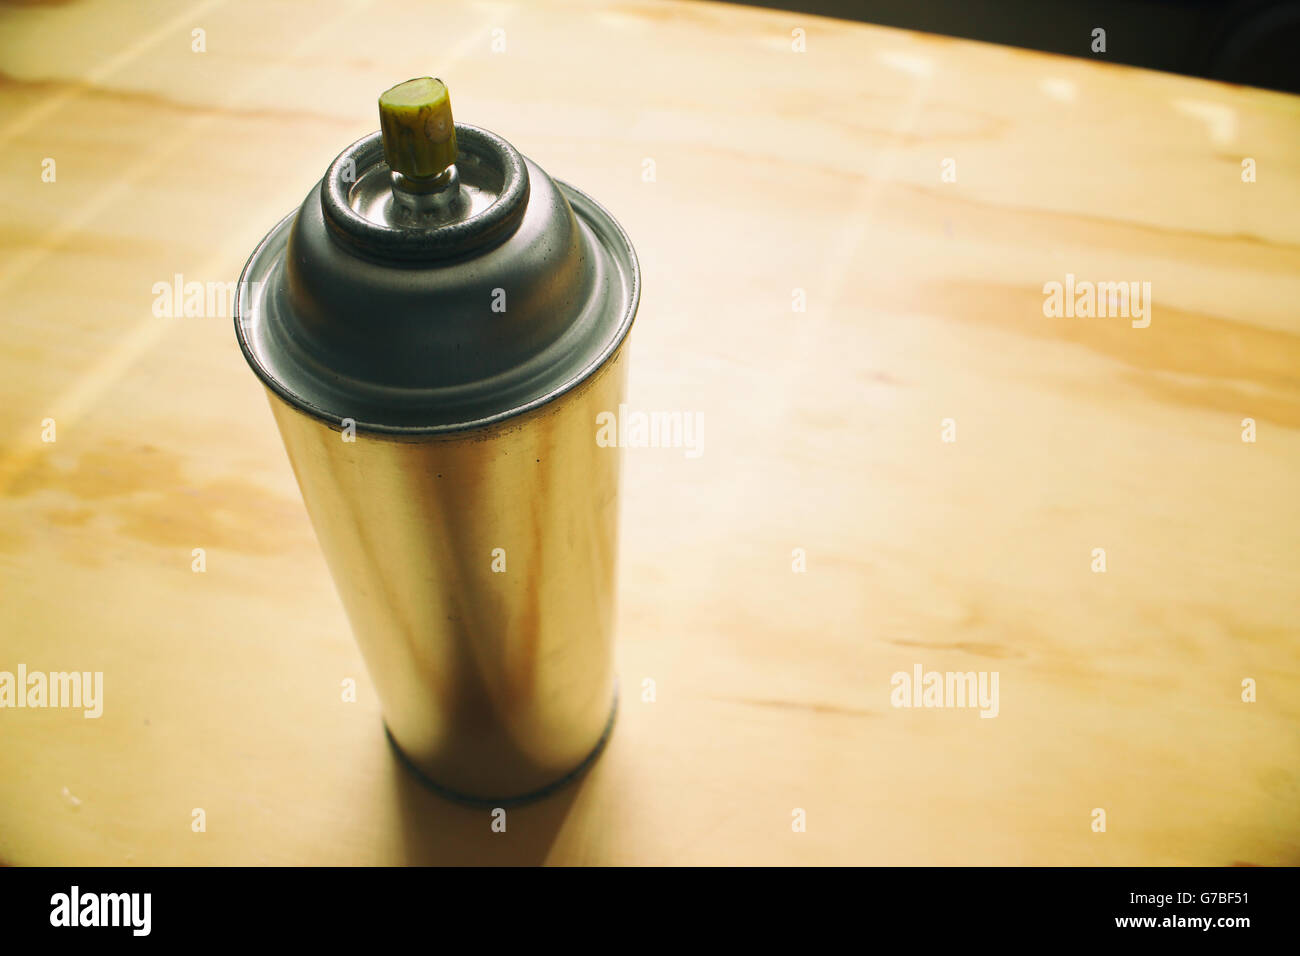 Photograph of a spray paint can on a wood table Stock Photo